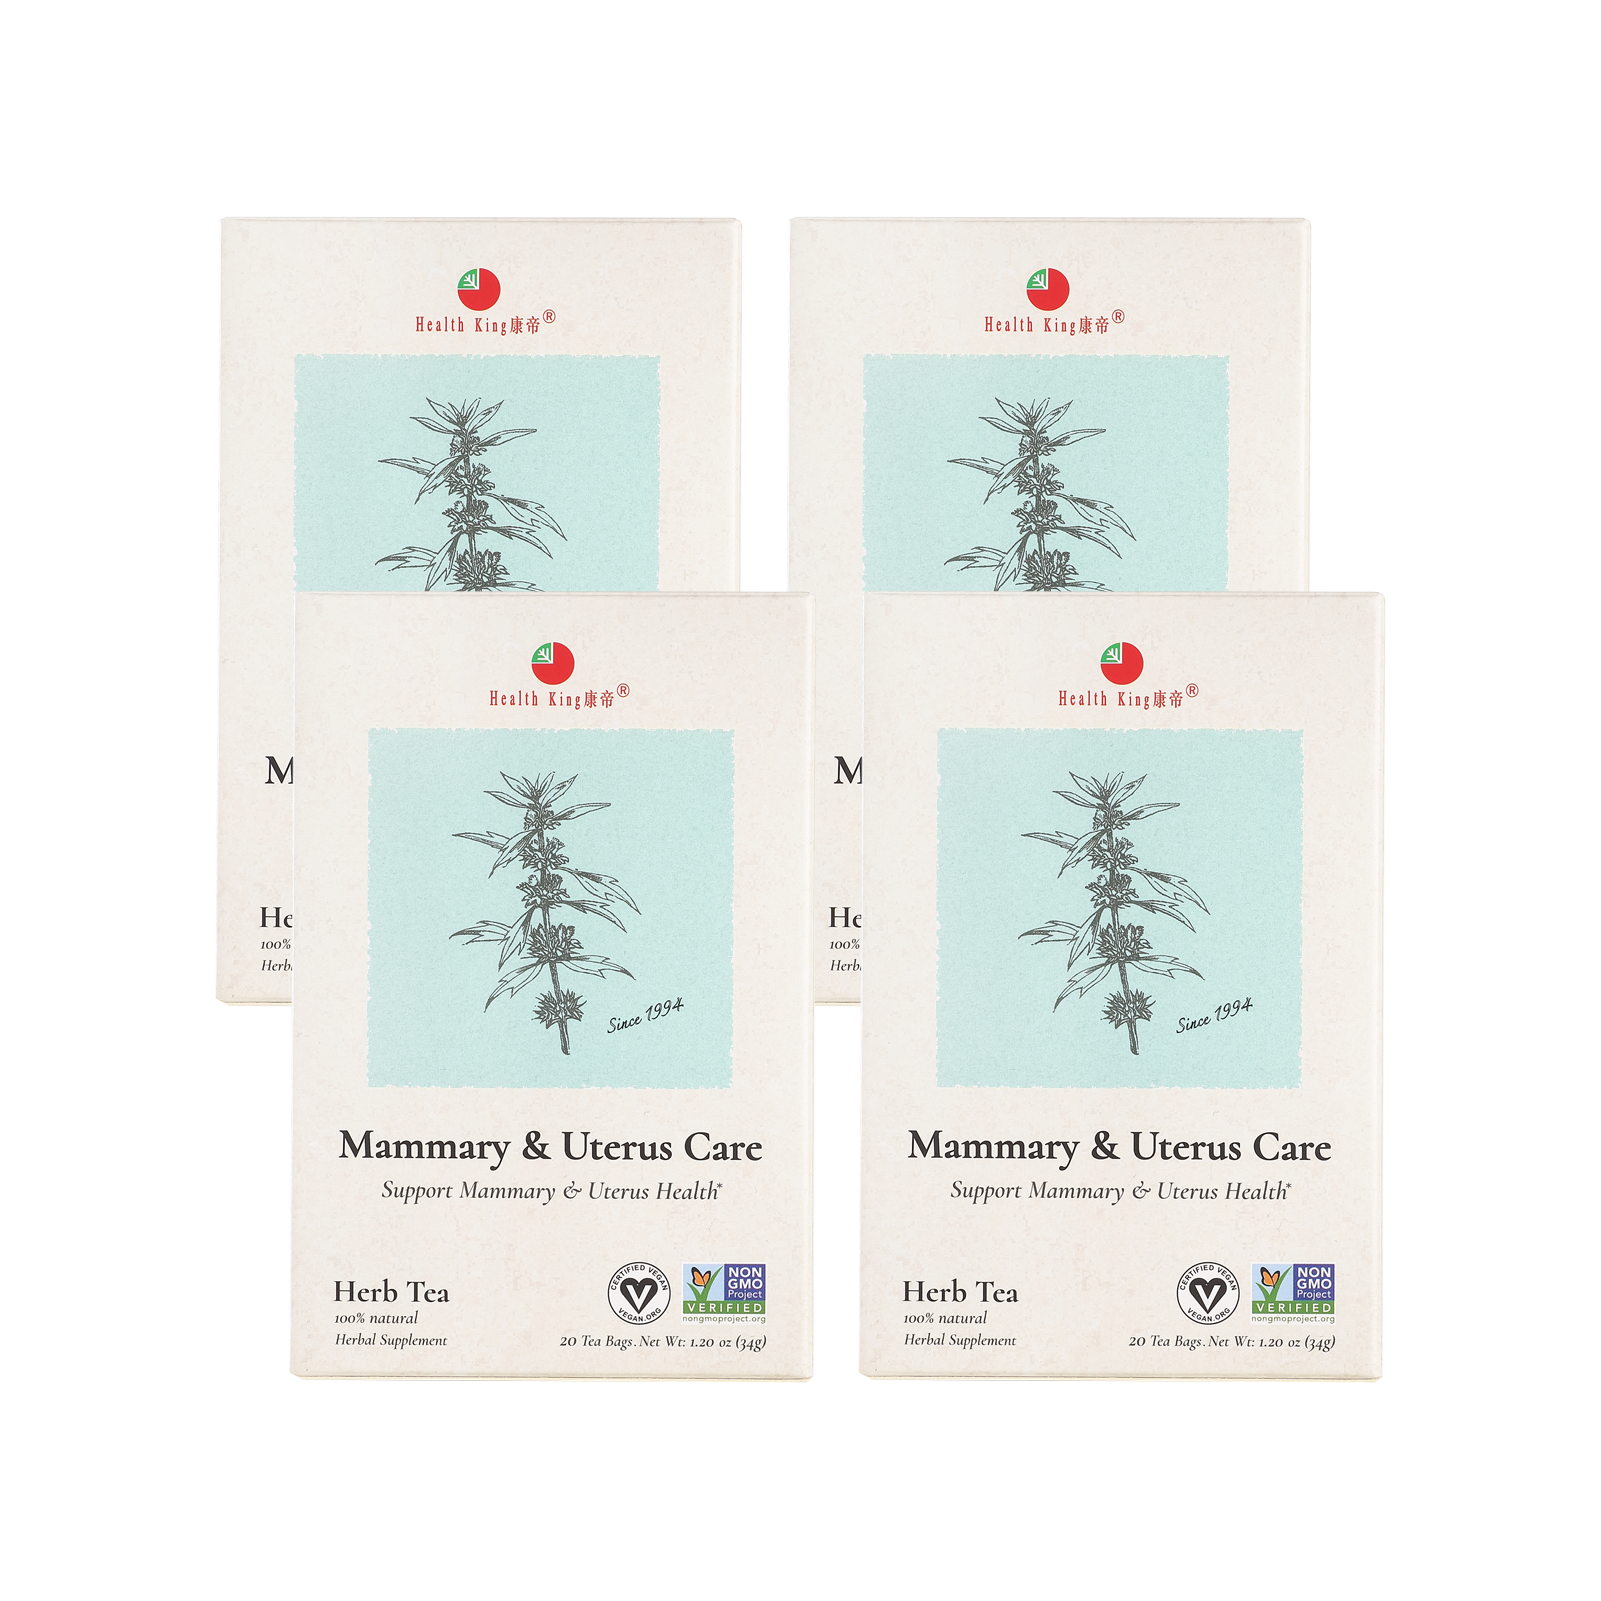 Packets of Mammary & Uterus Care Herb Tea with health-supportive labeling